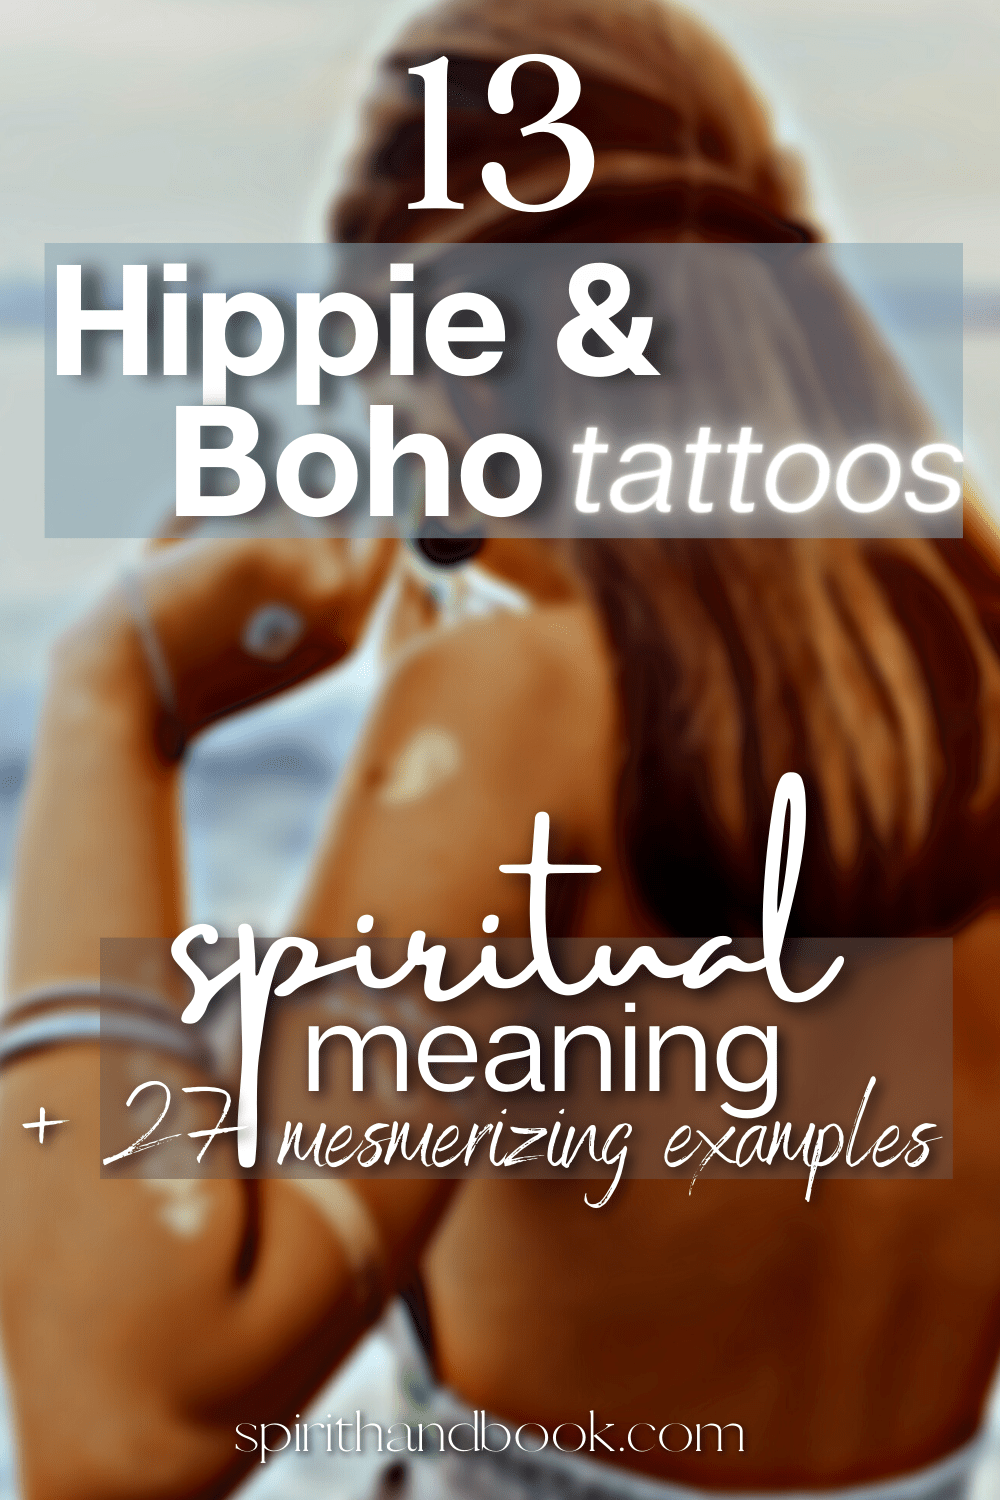 13 Hippie and Boho Tattoo Ideas (+ 27 Mesmerizing Examples) You’ll LOVE